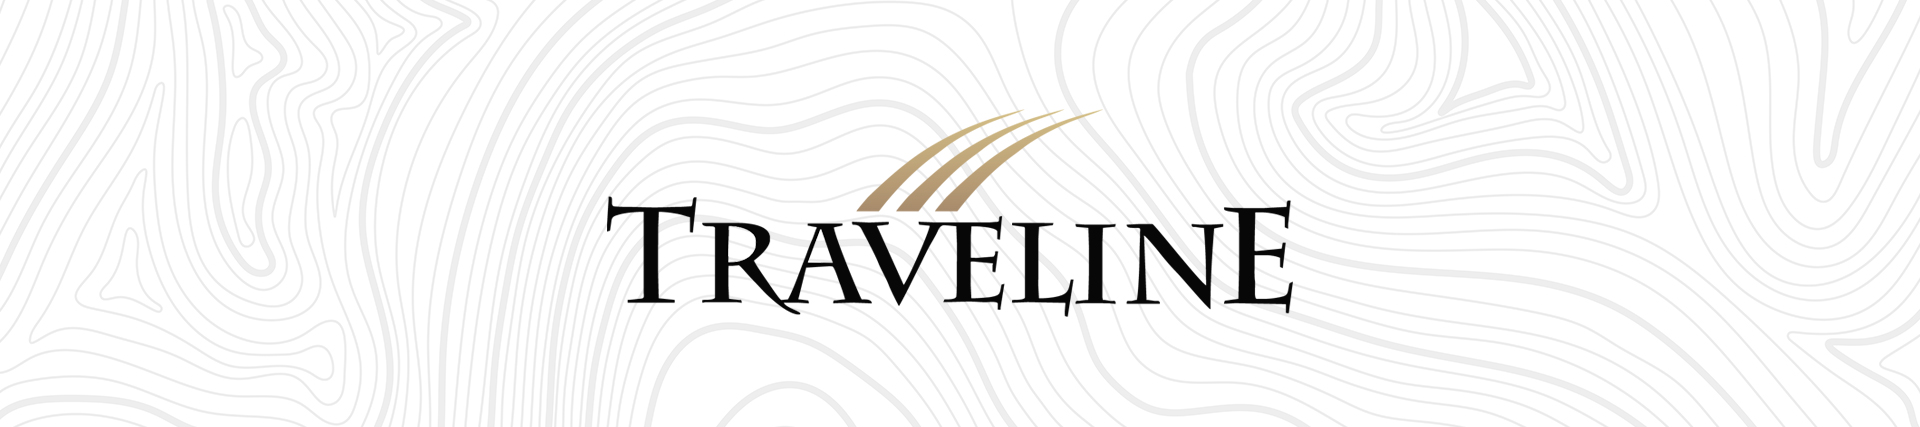 Direct Travel Continues Powerful Growth Mode with Acquisition of Traveline Travel Services